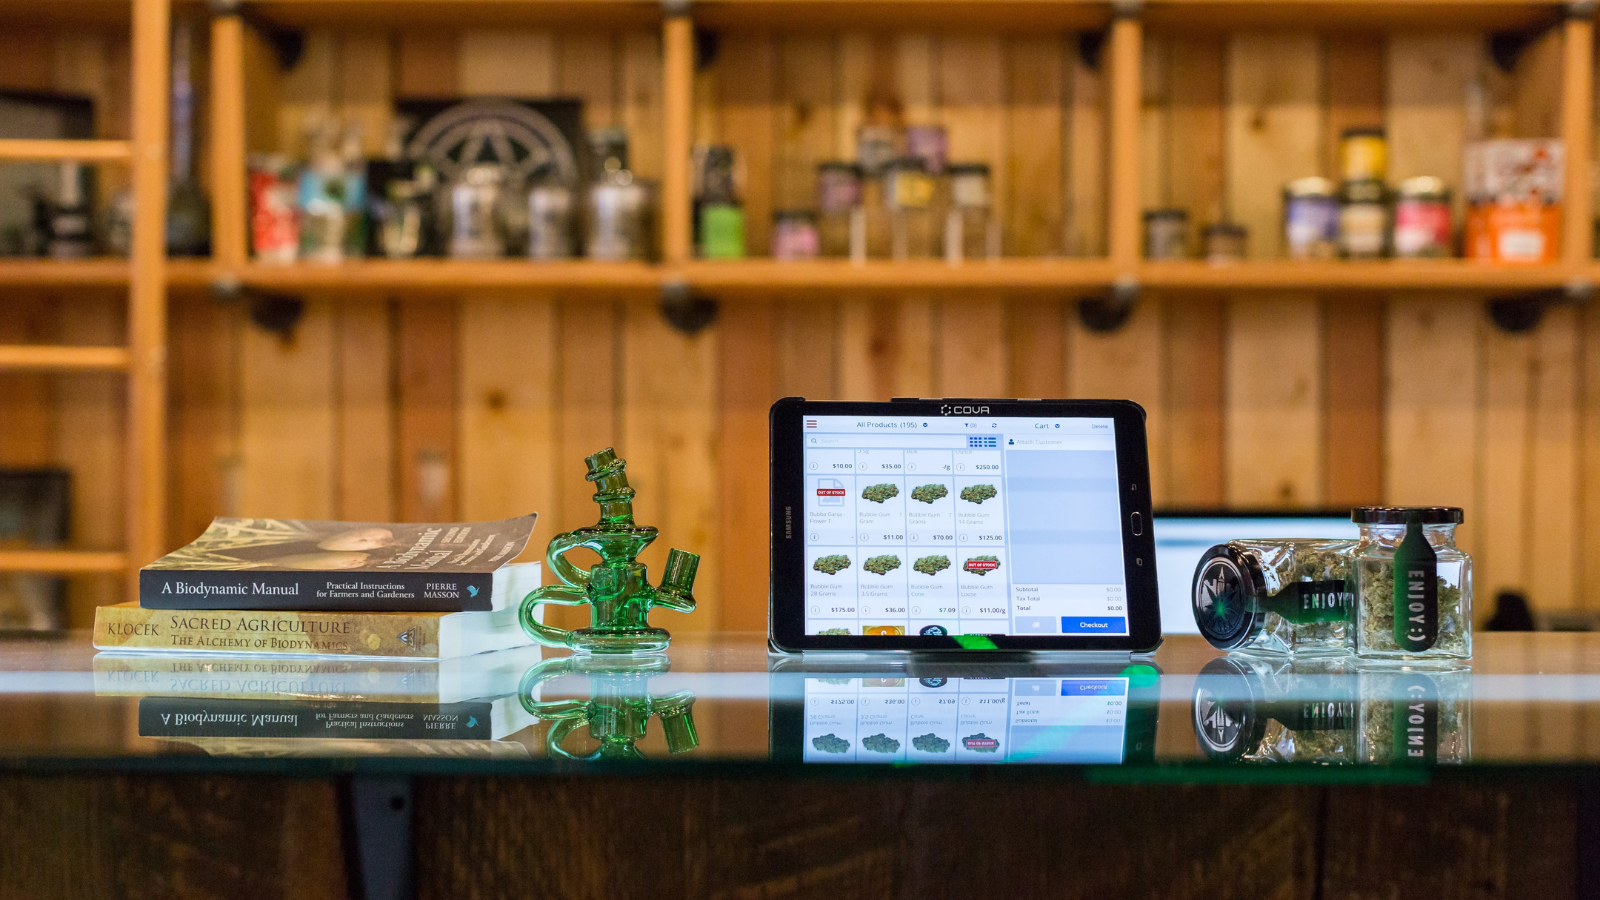 A New Era of Transparency: Legal Cannabis Stores Can Now Have Clear Windows